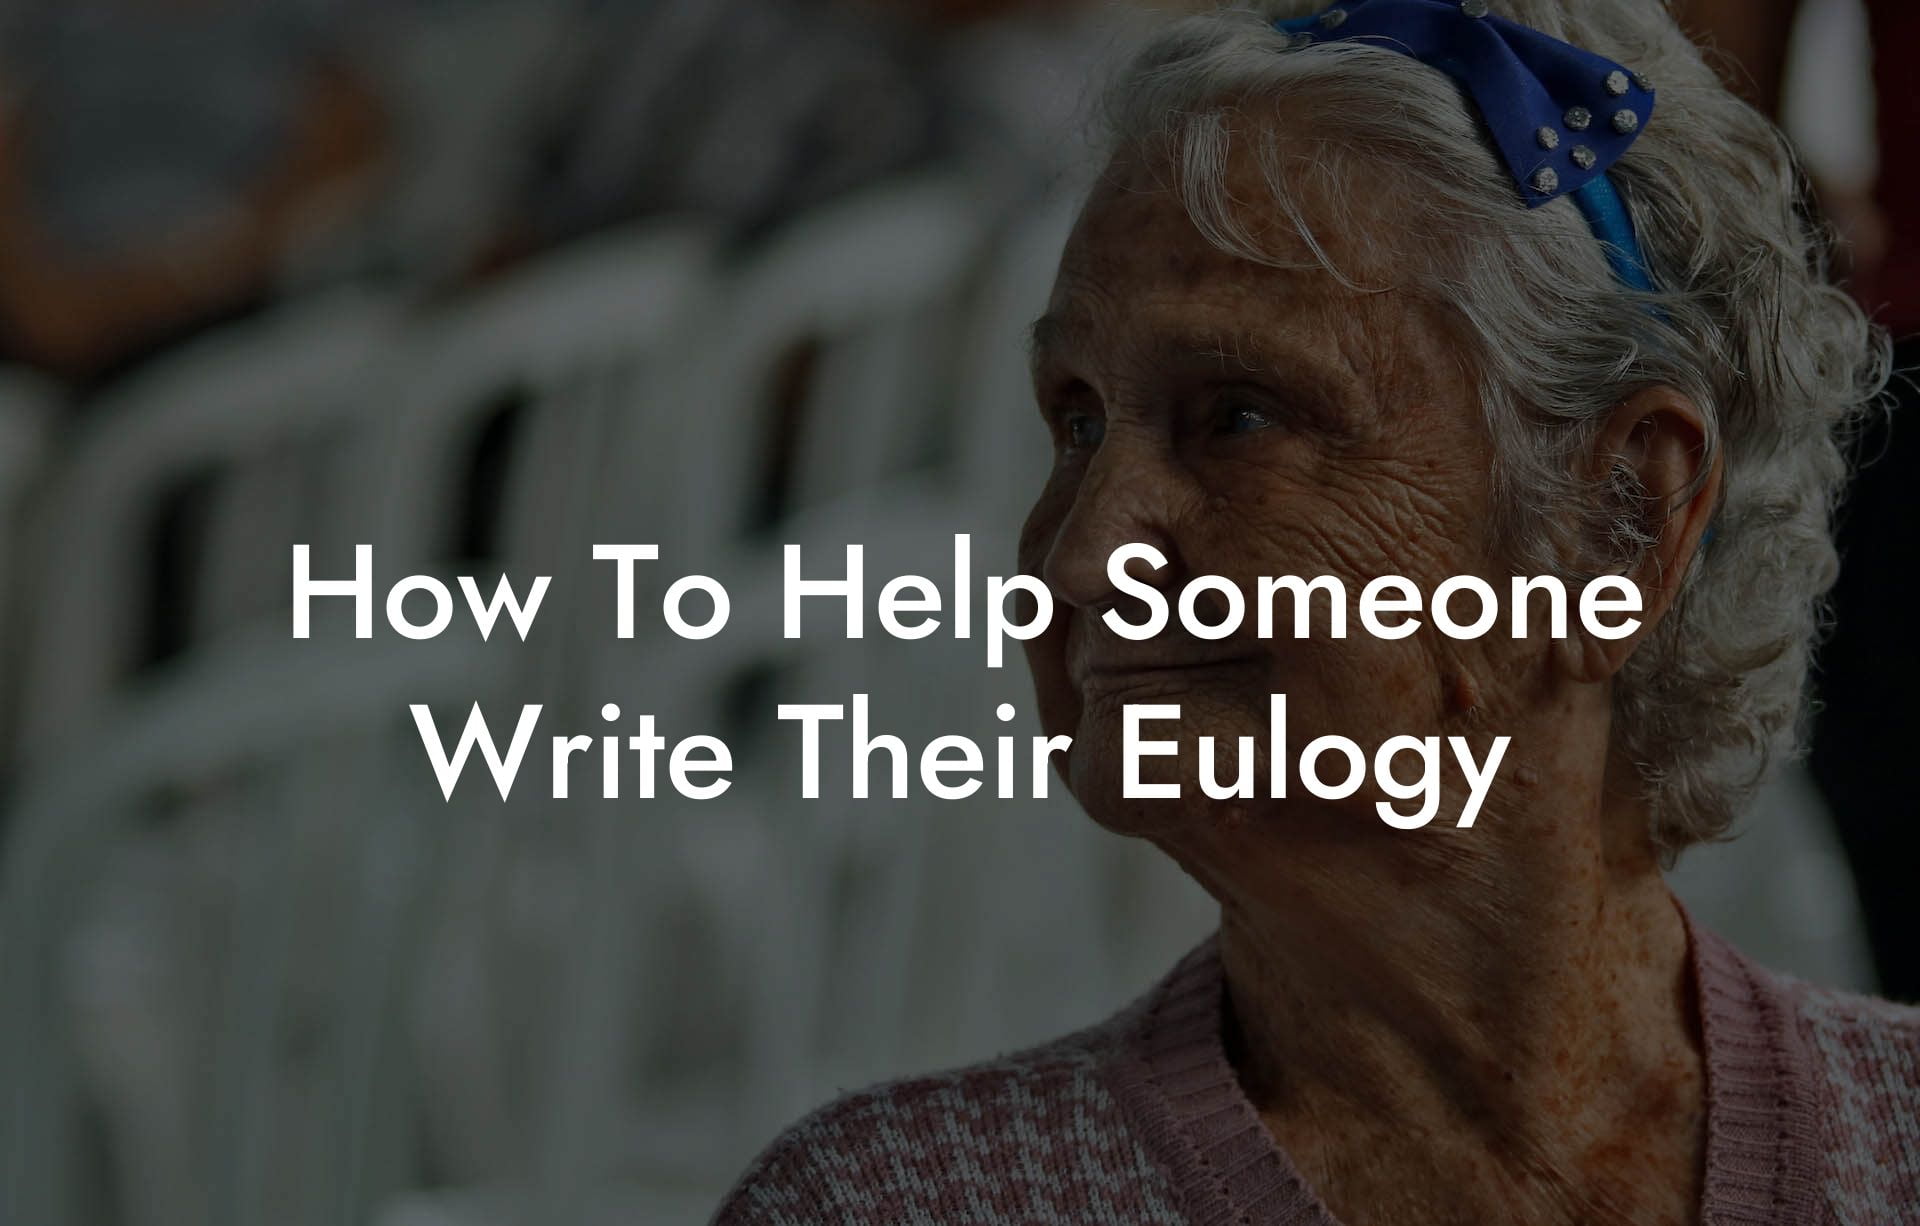 How To Help Someone Write Their Eulogy